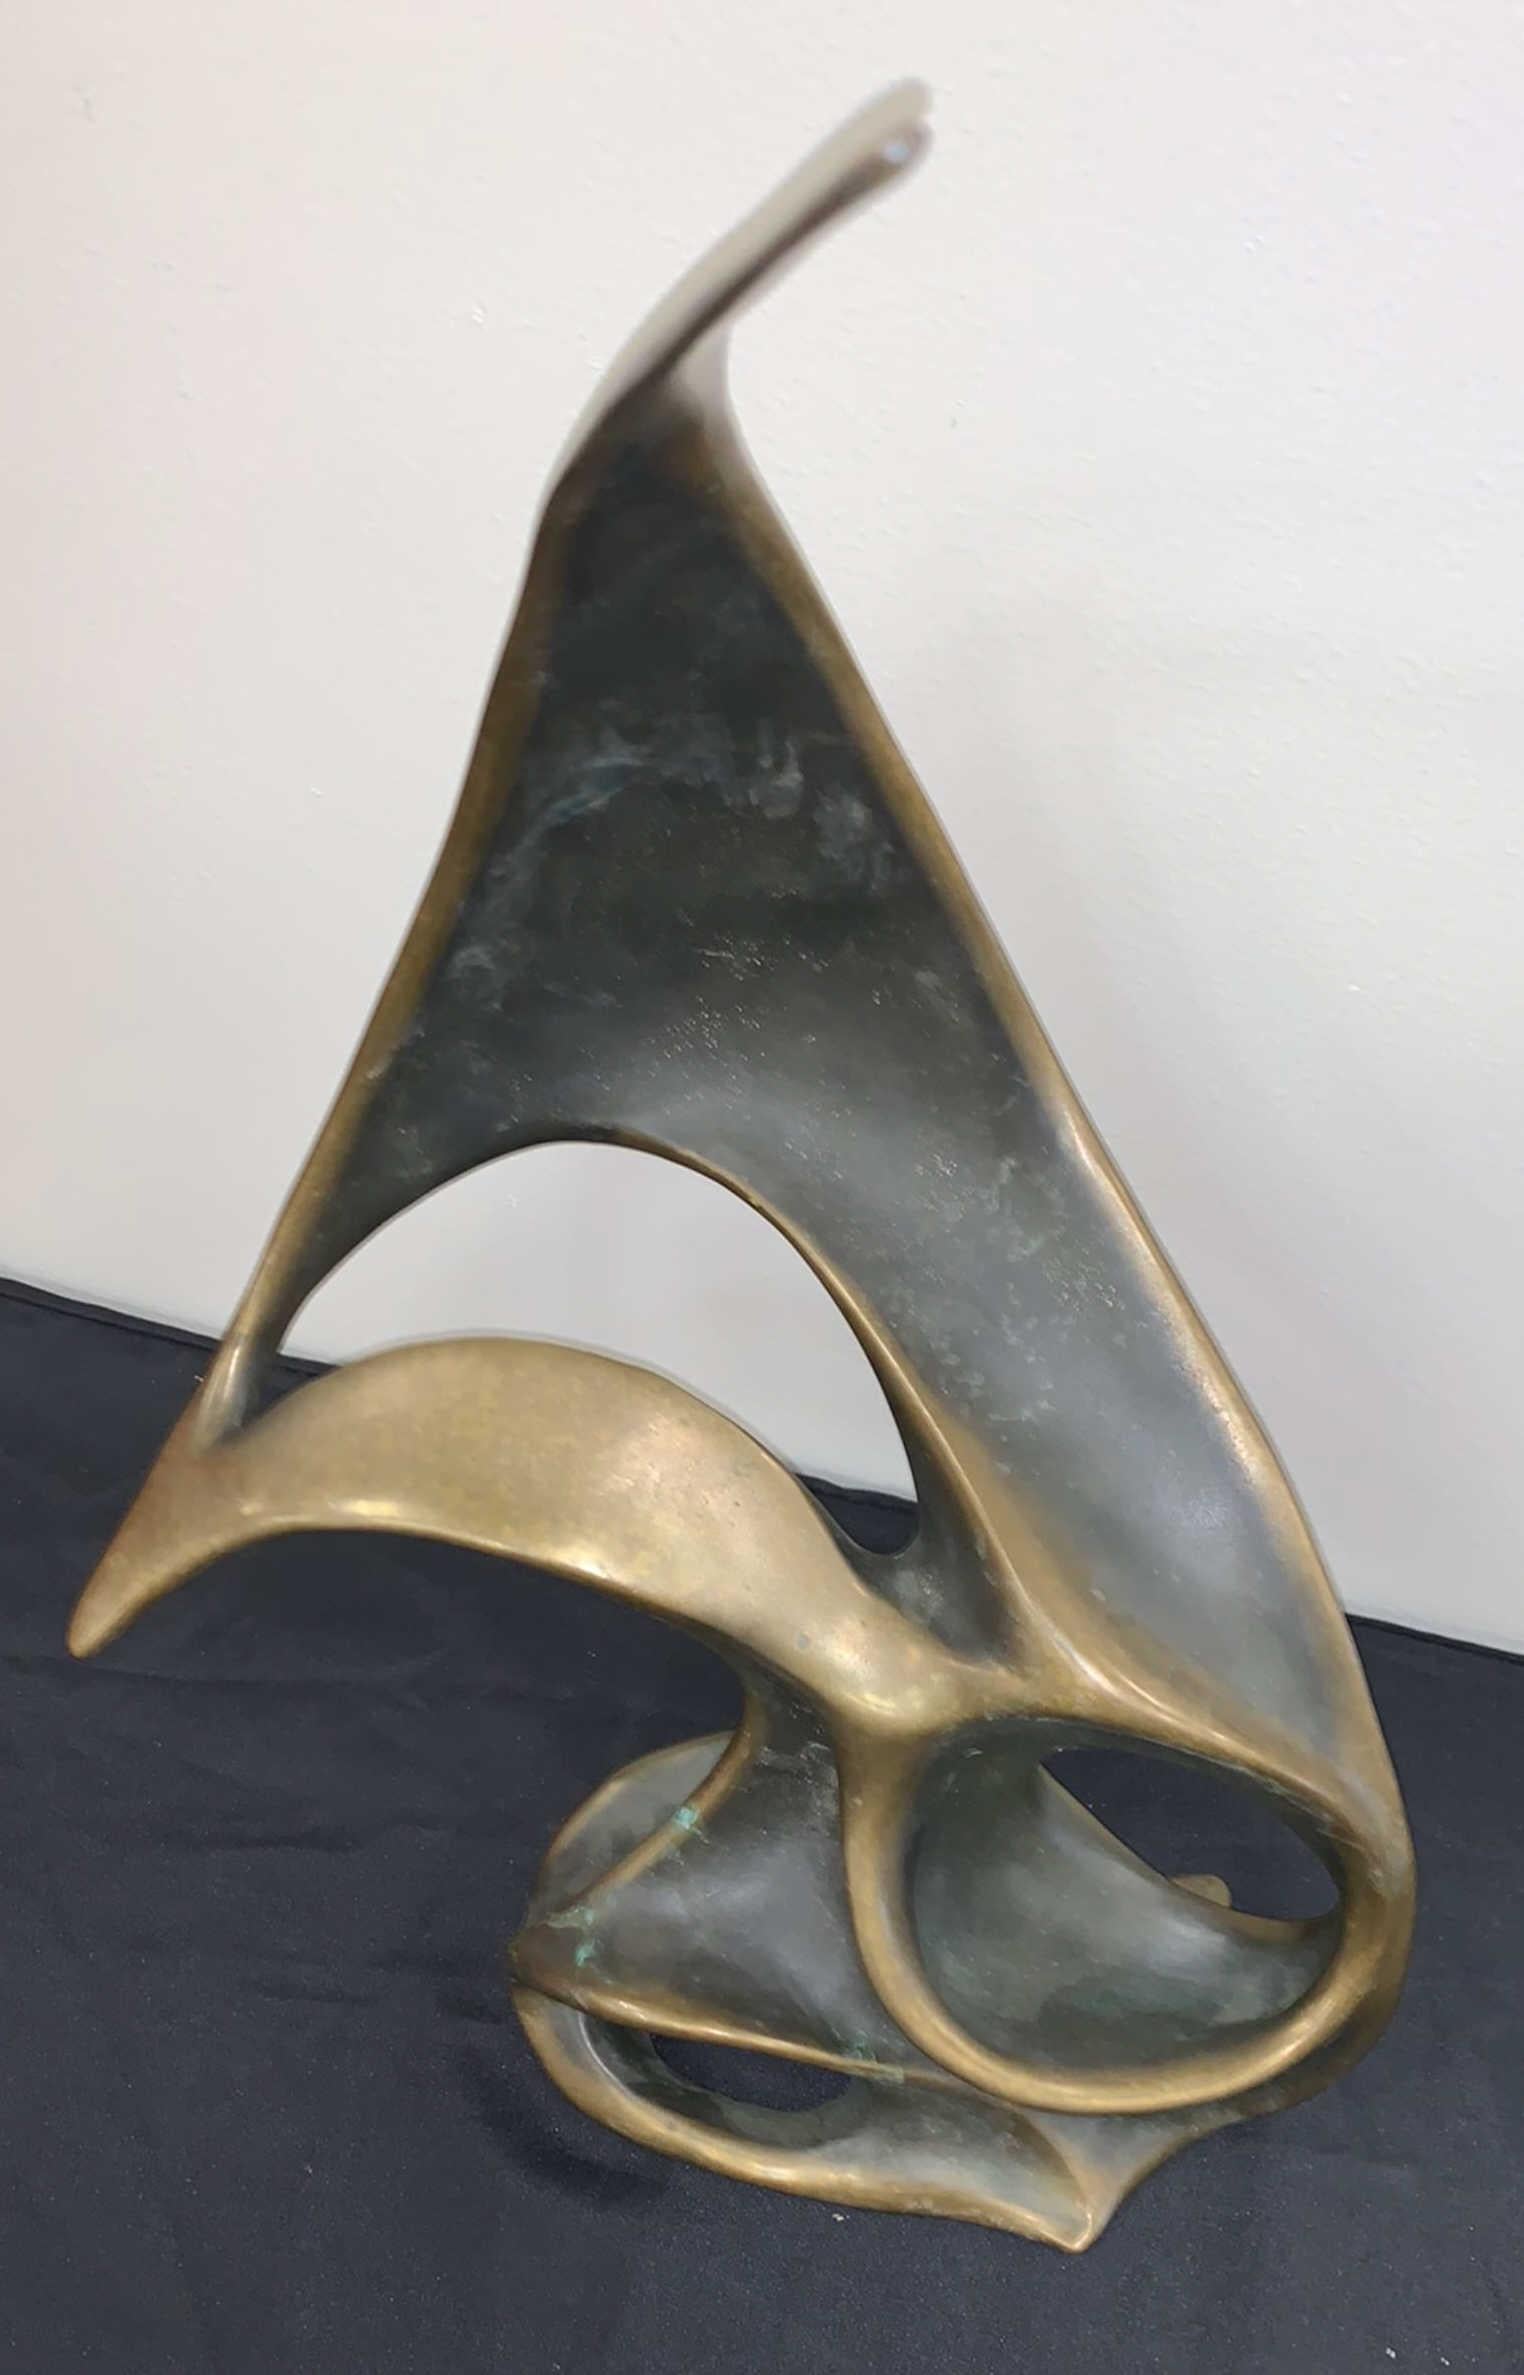 Beautiful abstract bronze freeform sculpture with sleek asymmetrical curves by world renowned sculptors Bob and Tom Bennett, identical twins who share a singular artistic vision. Their work is unmistakable, sculpted by hand and cast in bronze.